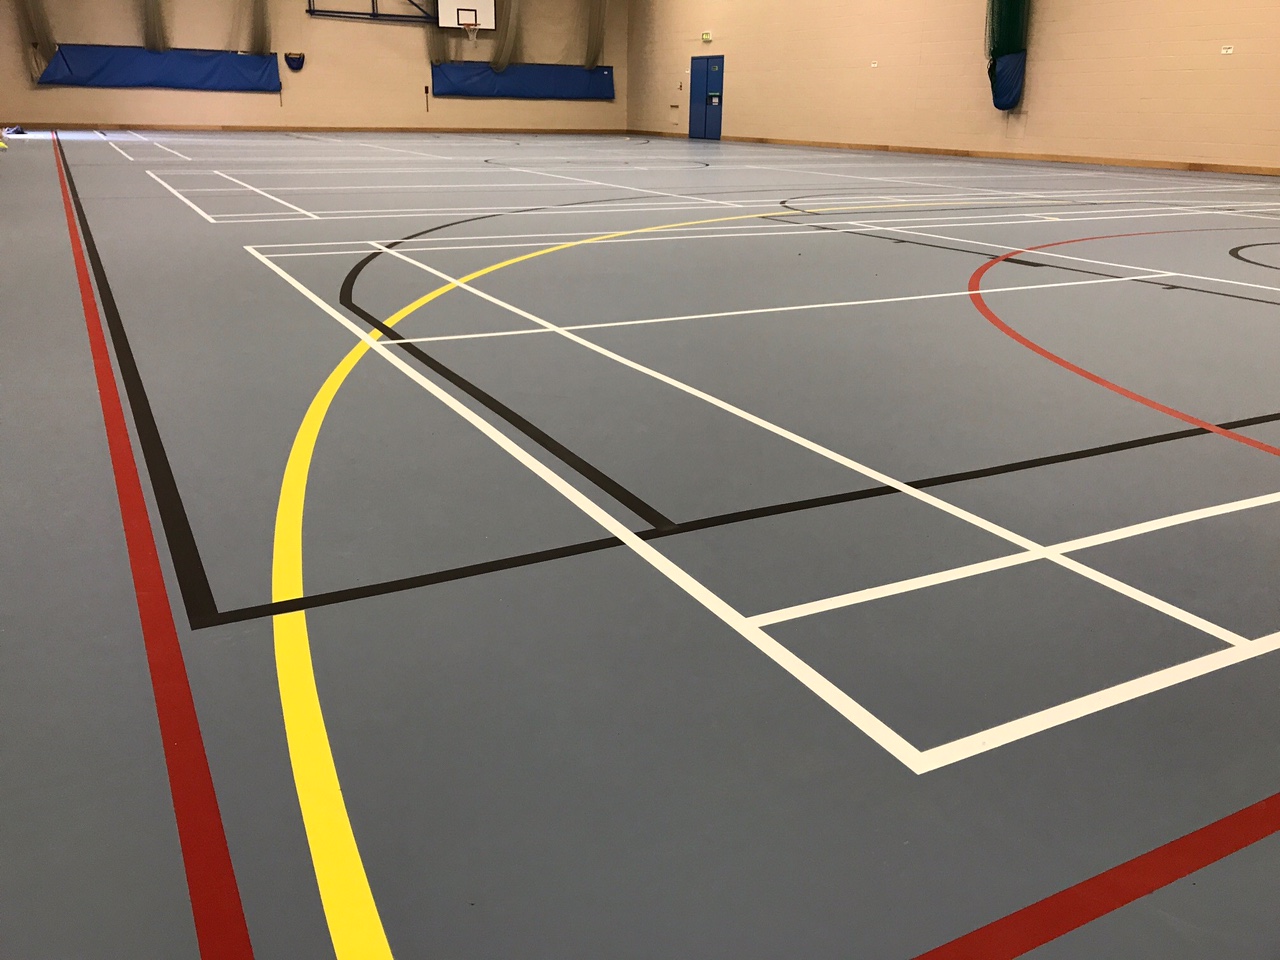 indoor school multi-use pulastic sports floor installation with court markings by Sports Surfaces UK